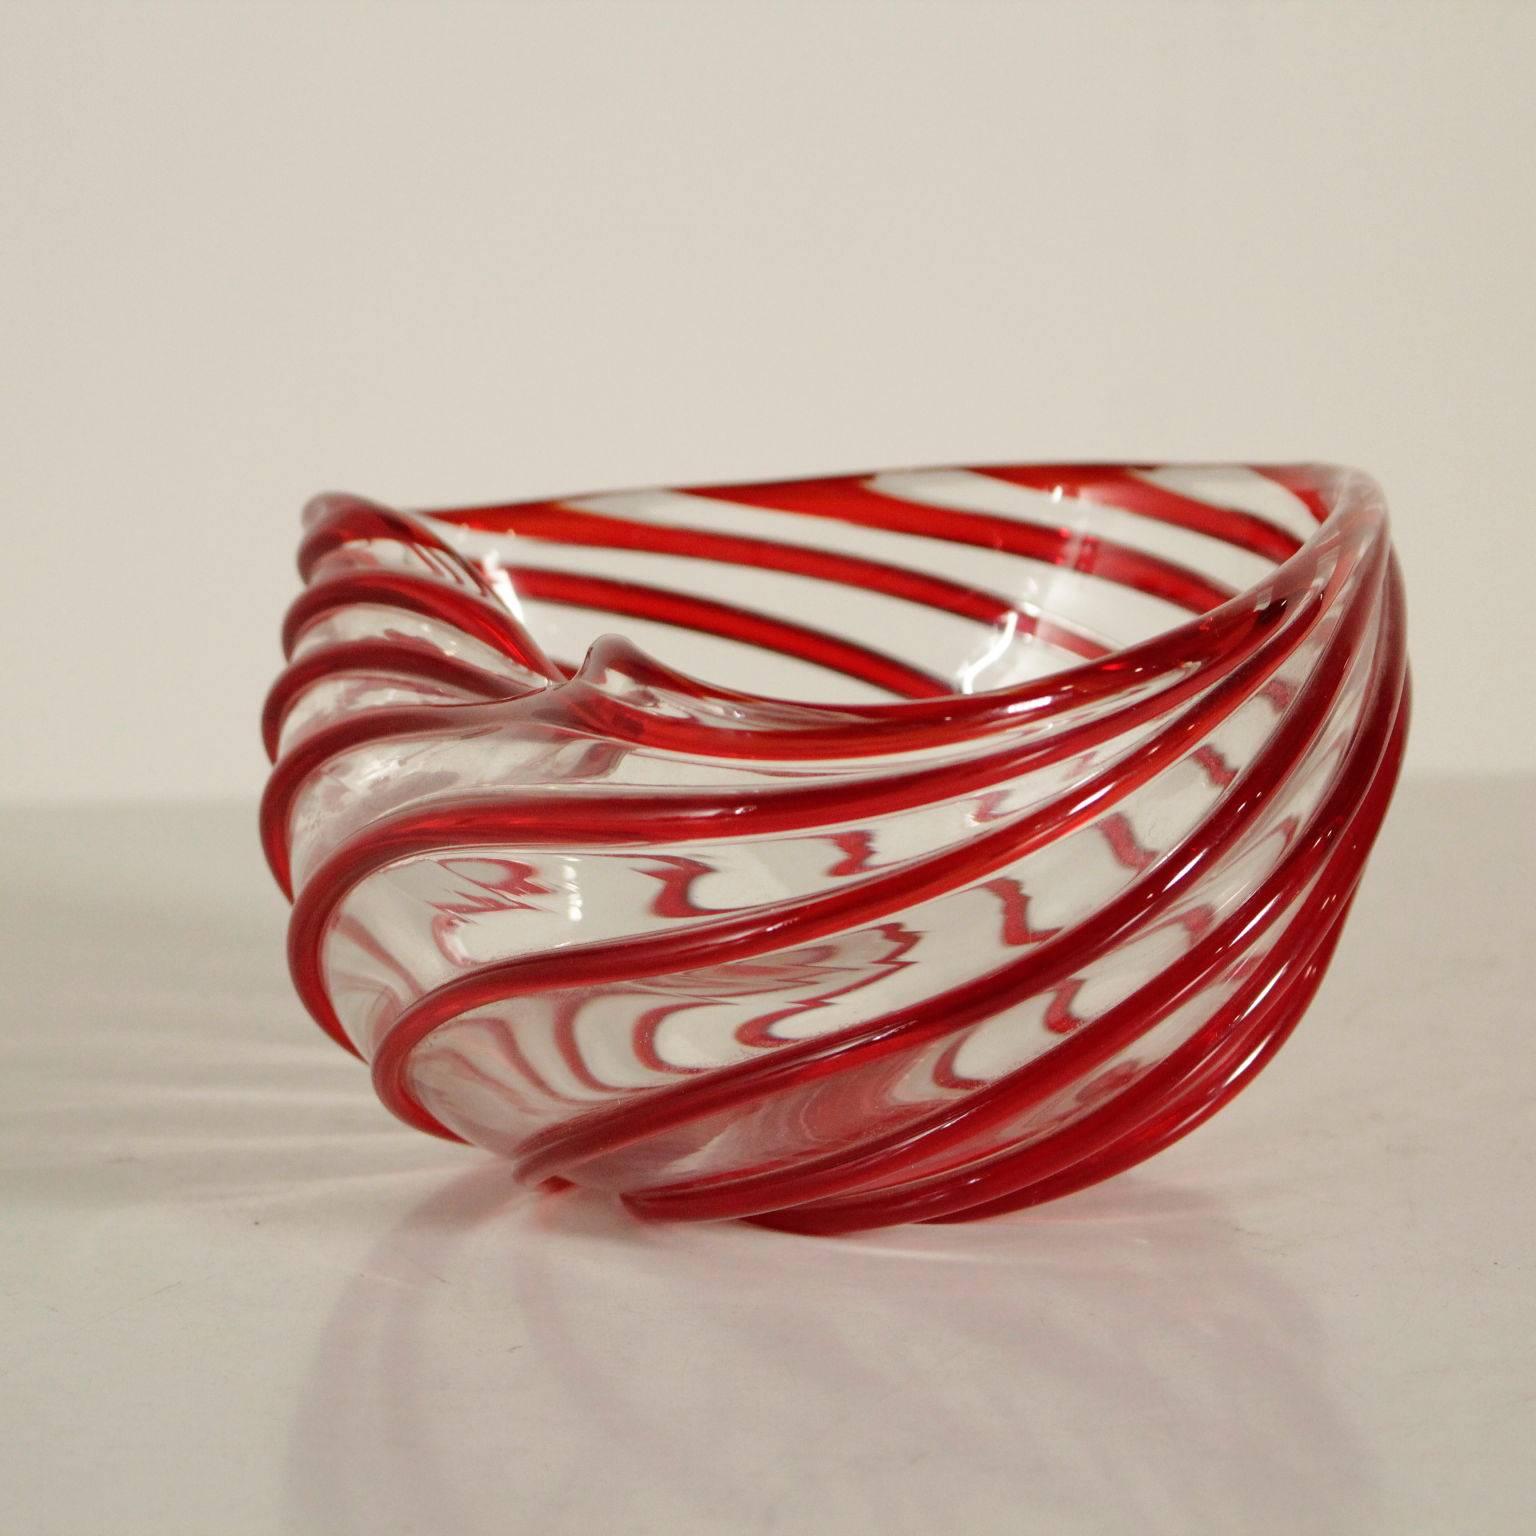 A bicolor centerpiece designed by Archimede Seguso (1909-1999), blown glass with relief spiral effect. Manufacturer brand under the base. Manufactured in Italy, 1960s.